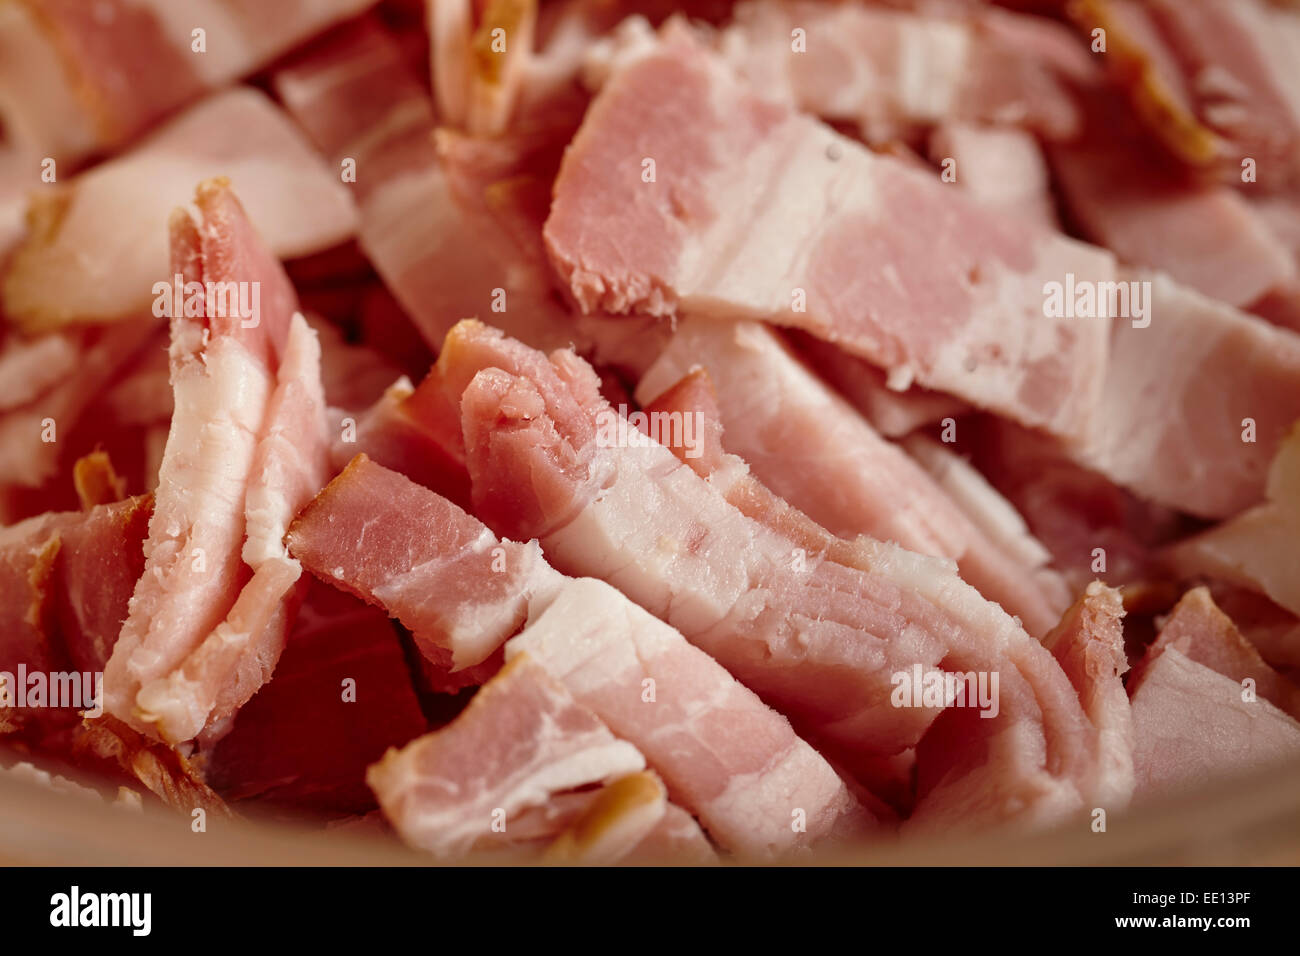 Pieces of uncooked raw bacon Stock Photo Alamy